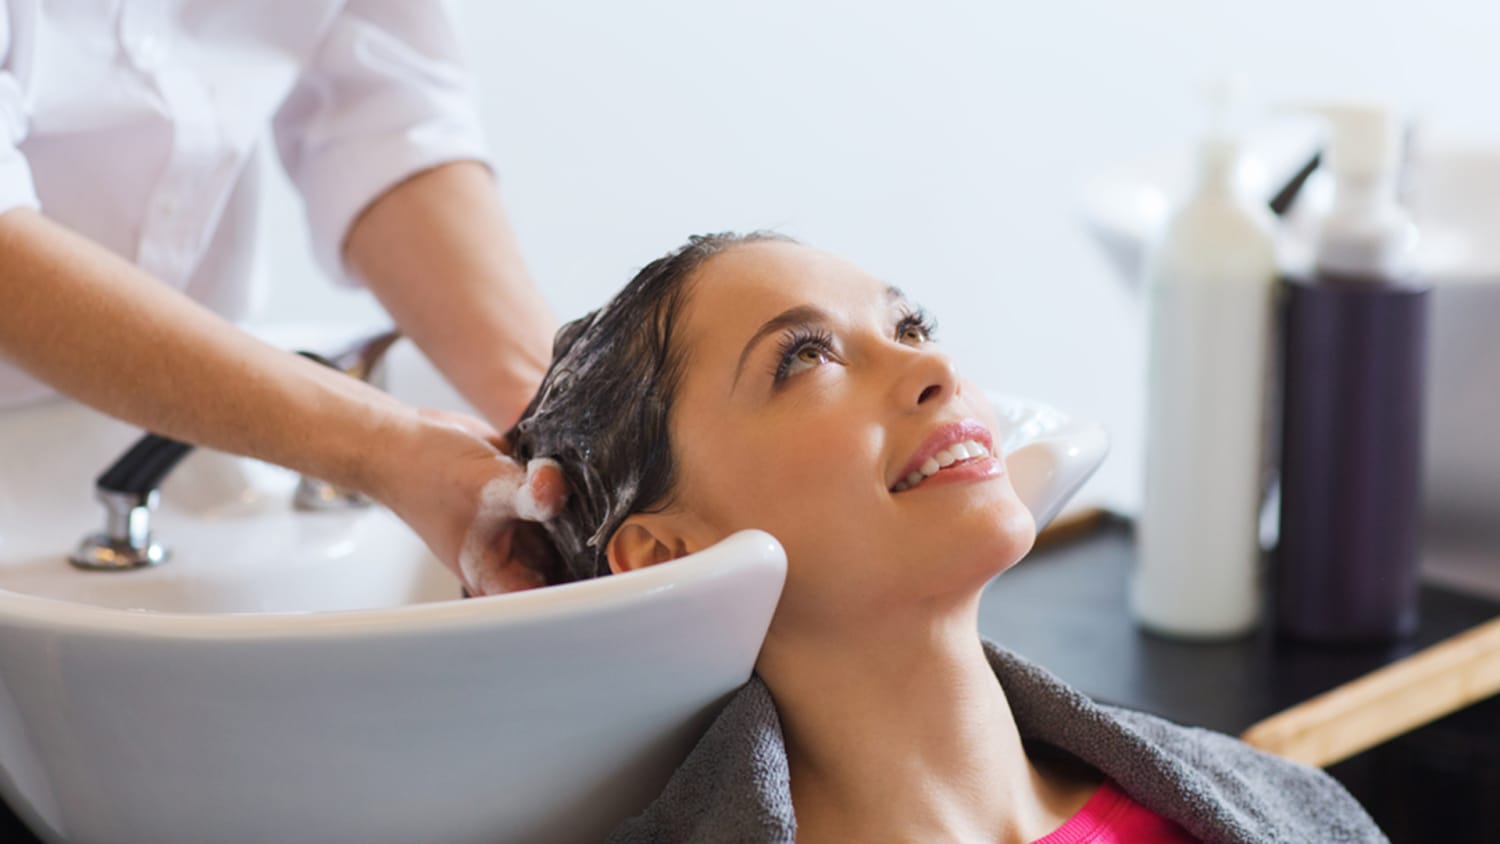 How much to tip your hairdresser and other salon etiquette